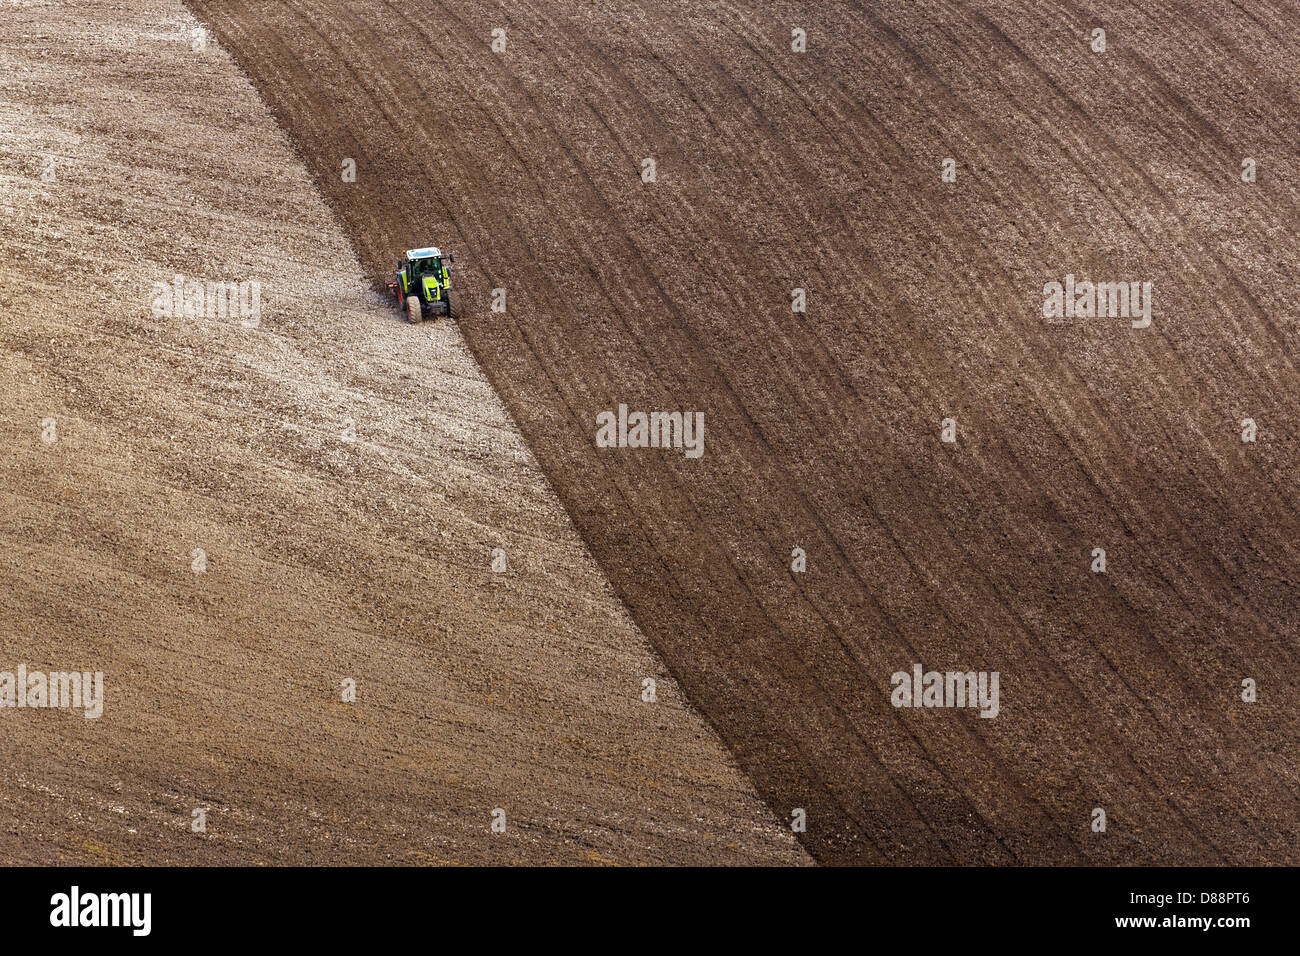 A lone tractor ploughing a field on the South Downs in Hampshire UK, Stock Photo